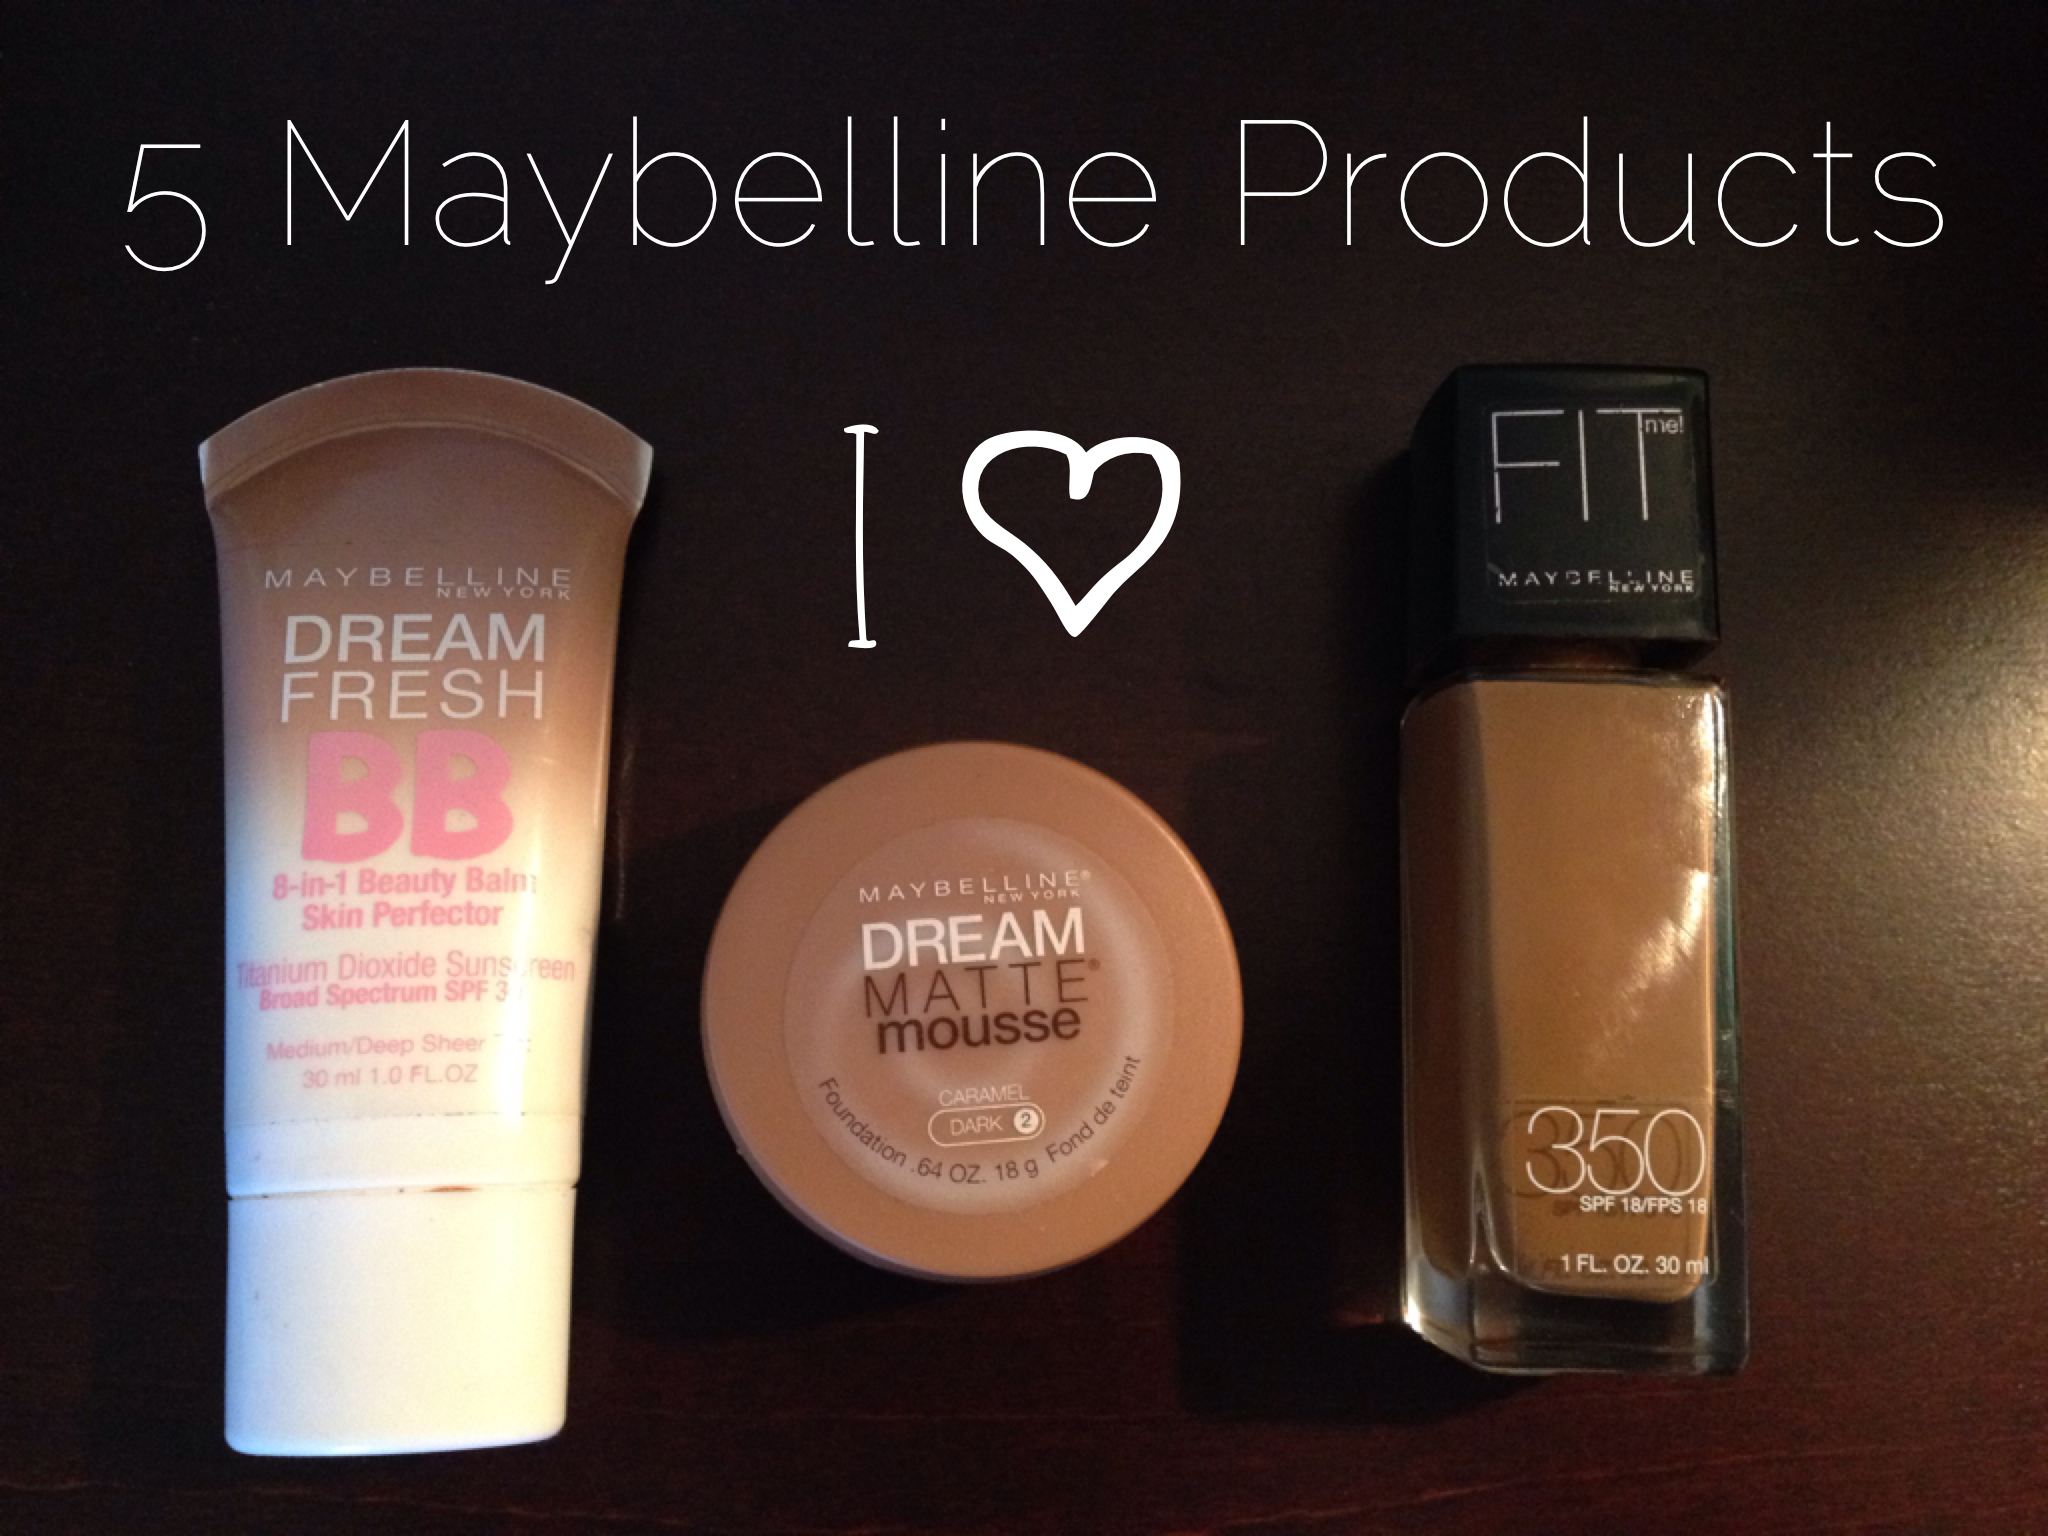 5 Maybelline Products That Stay in My Makeup Bag